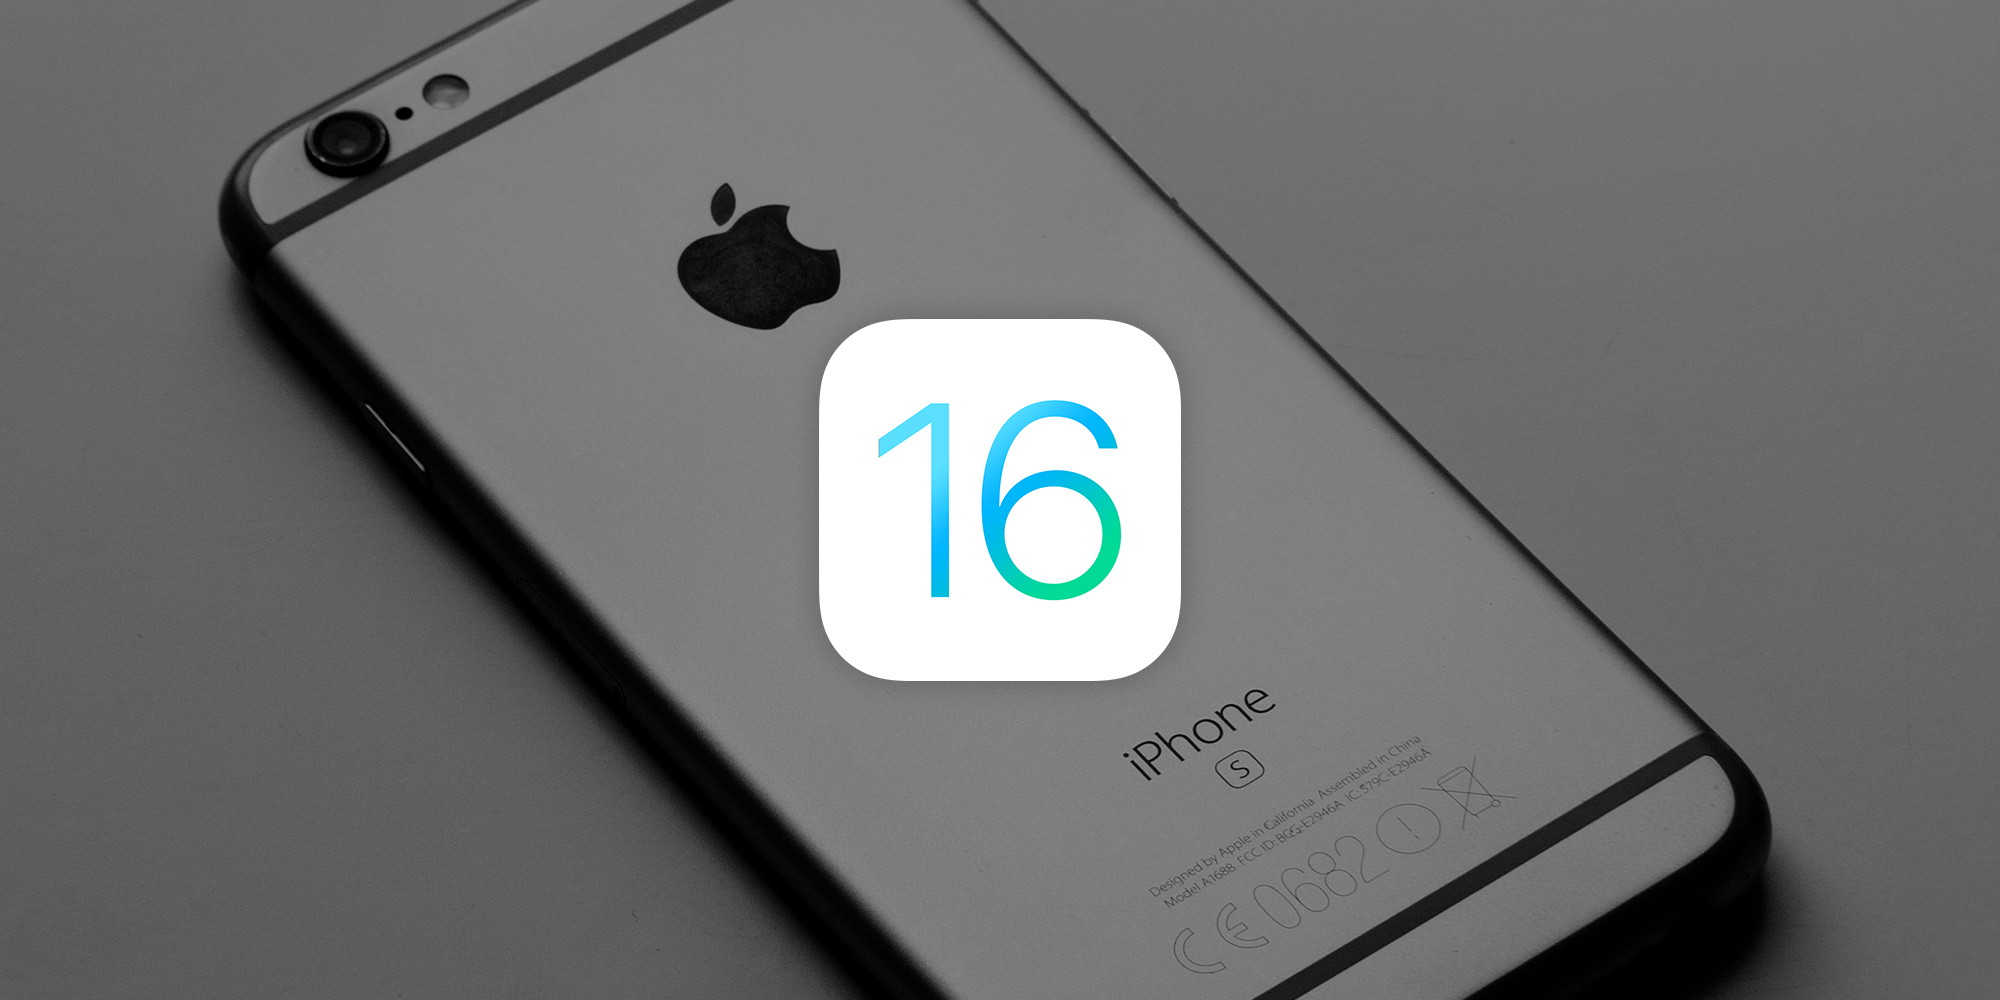 Rumor Ios 16 To Drop Support For Iphone 6s Iphone 6s Plus And First Gen Iphone Se 9to5mac